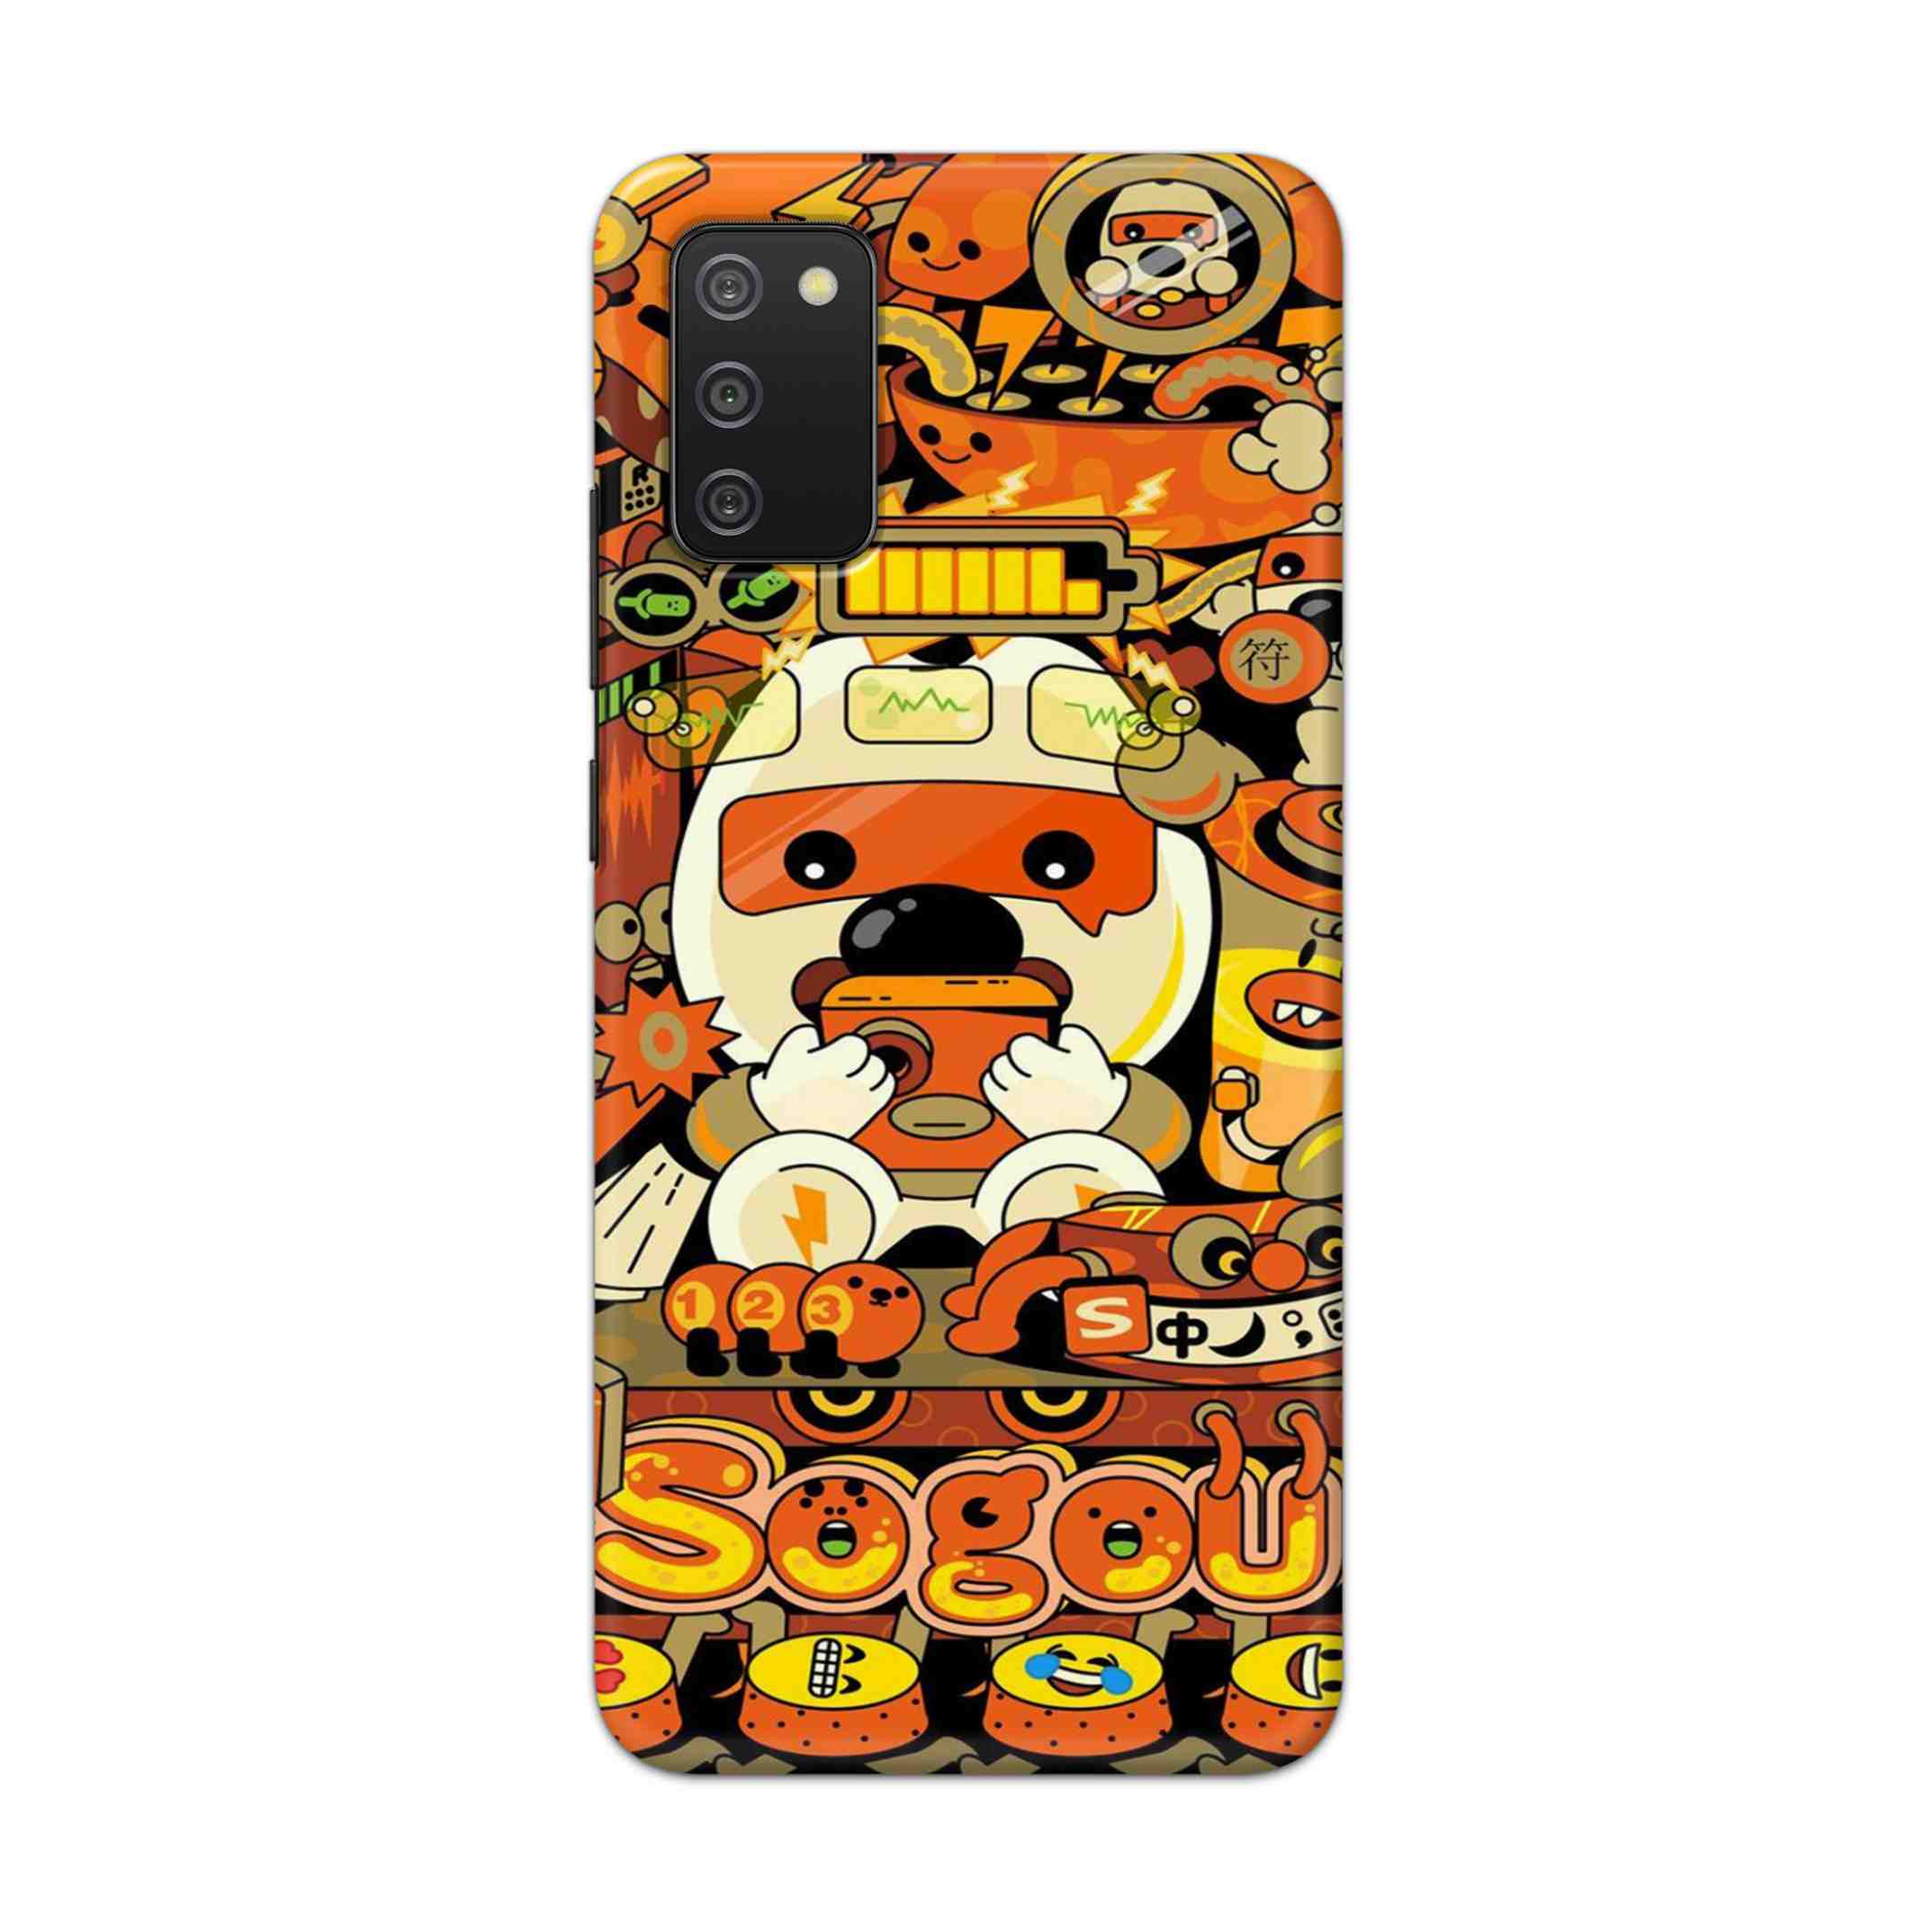 Buy Sogou Hard Back Mobile Phone Case Cover For Samsung Galaxy M02s Online